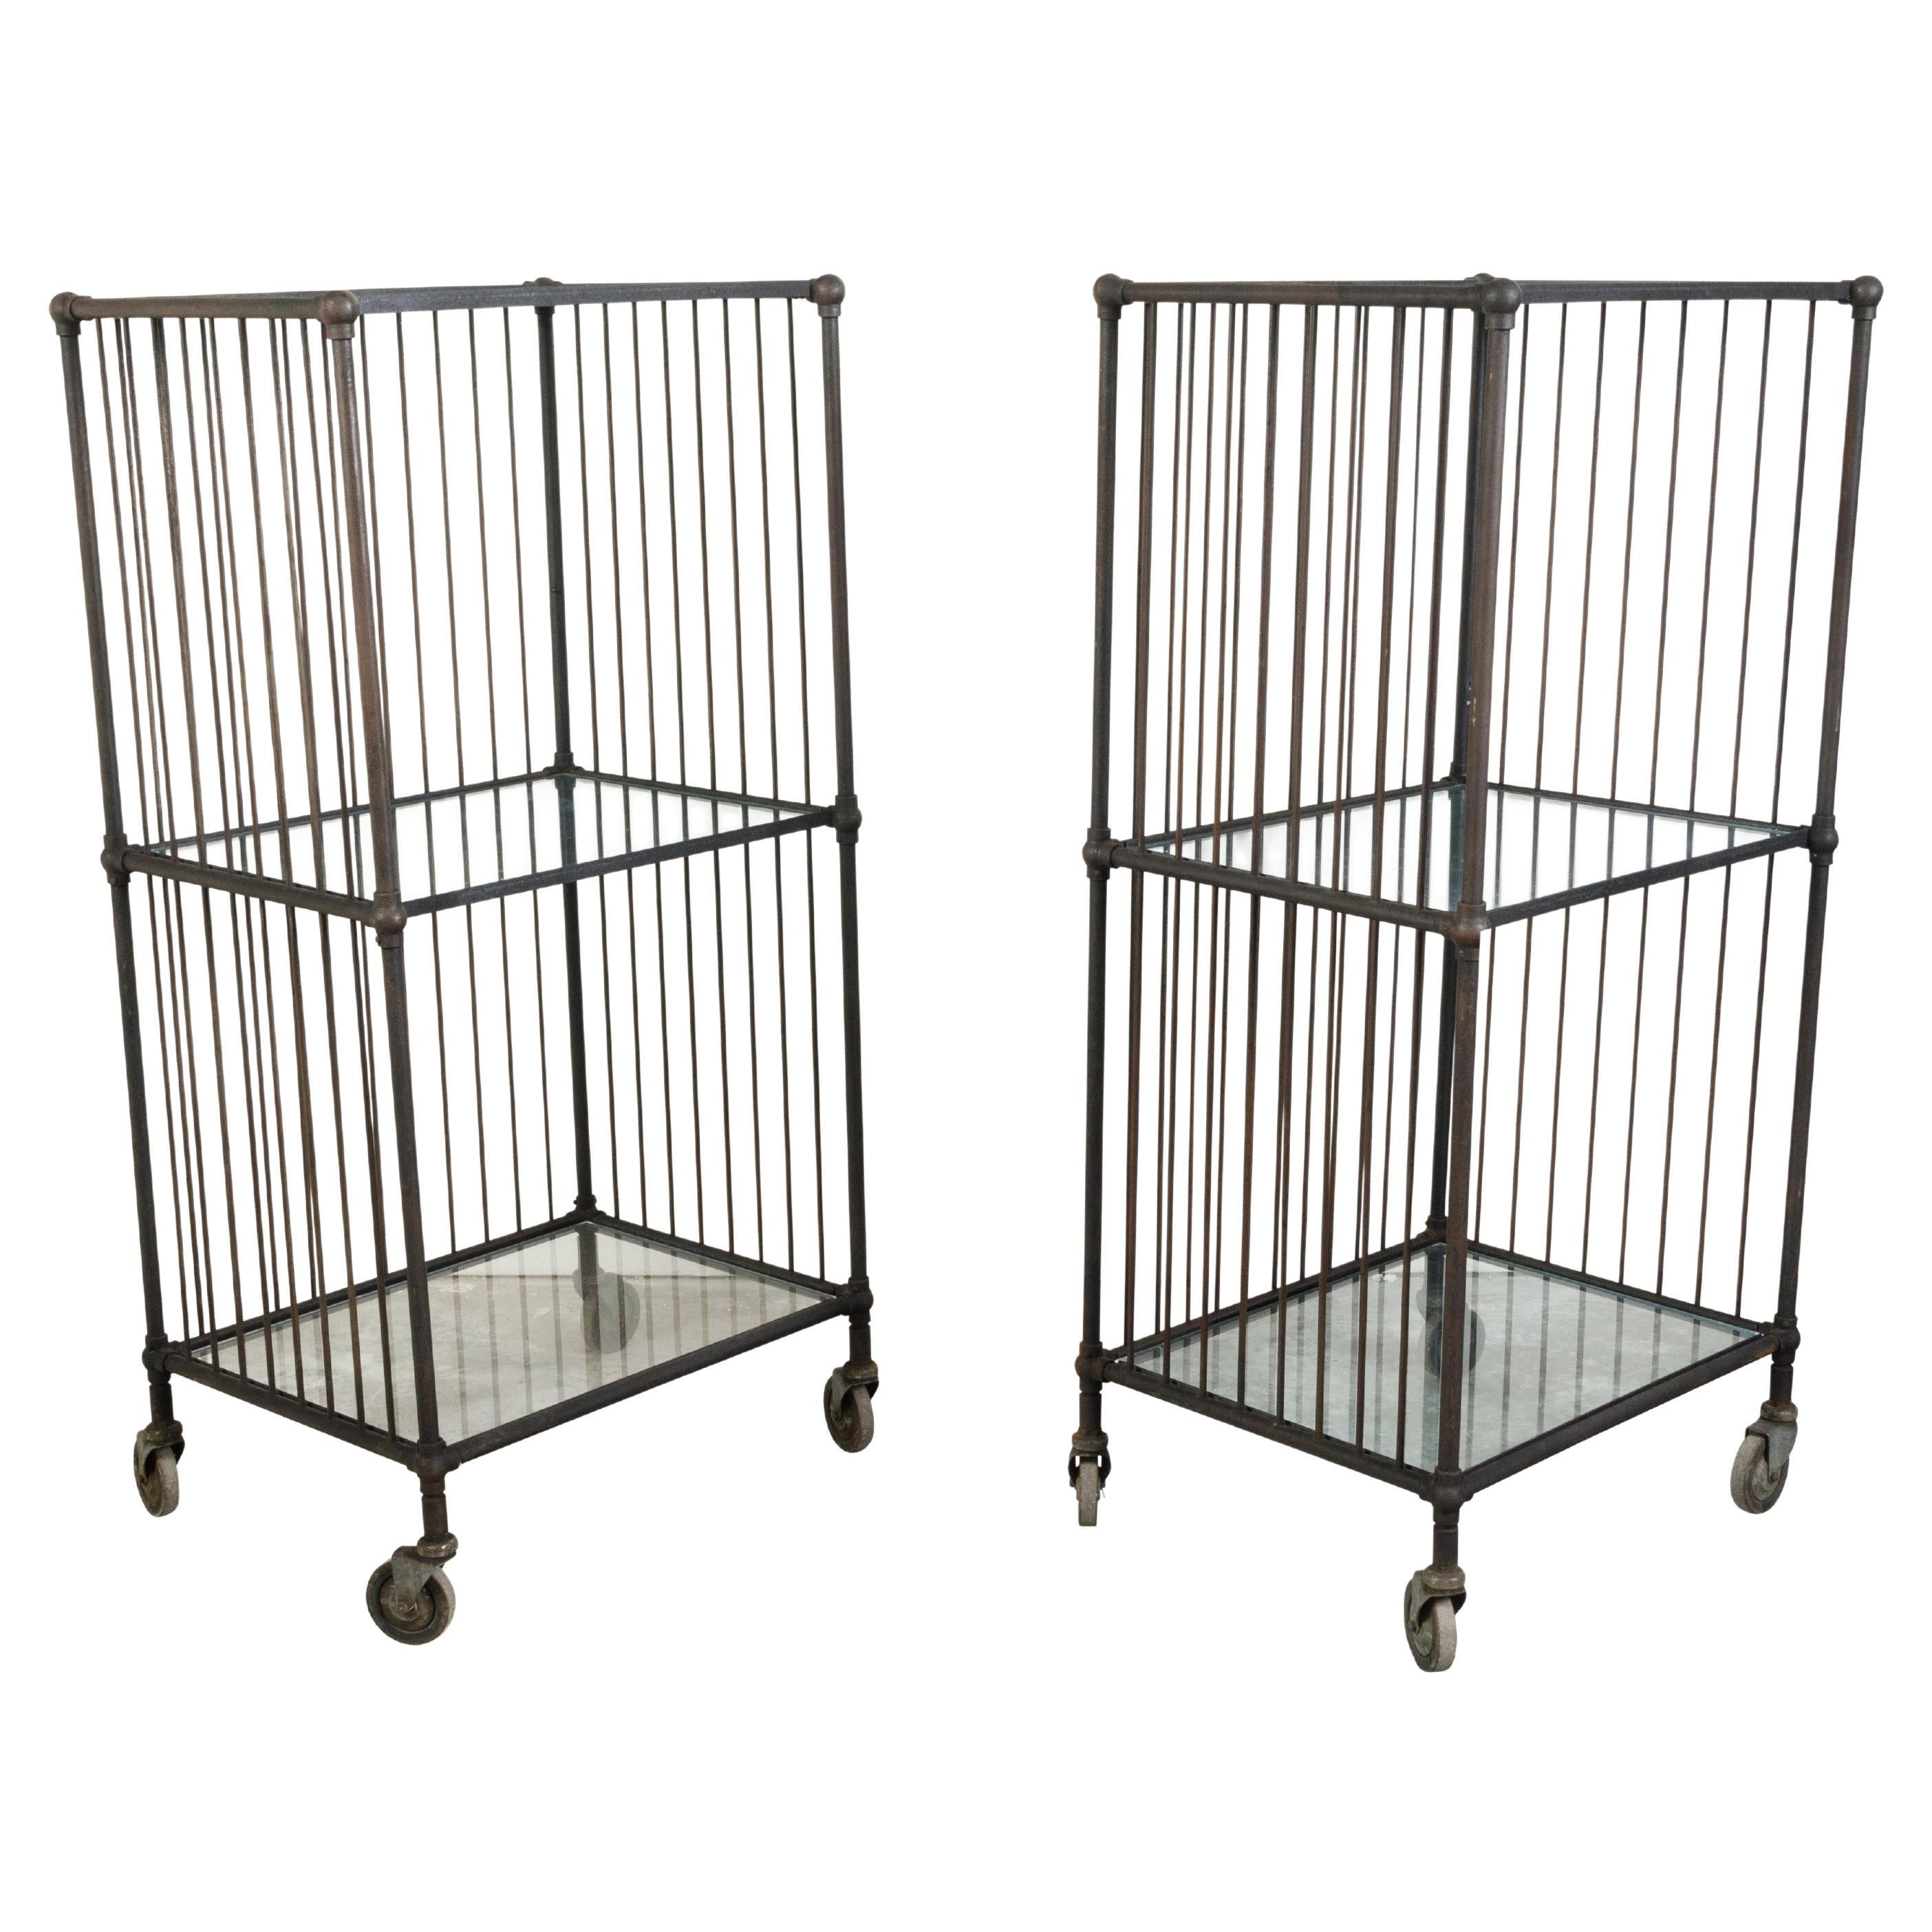 Vintage Industrial Carts with Glass Shelves and Casters, Sold Individually For Sale